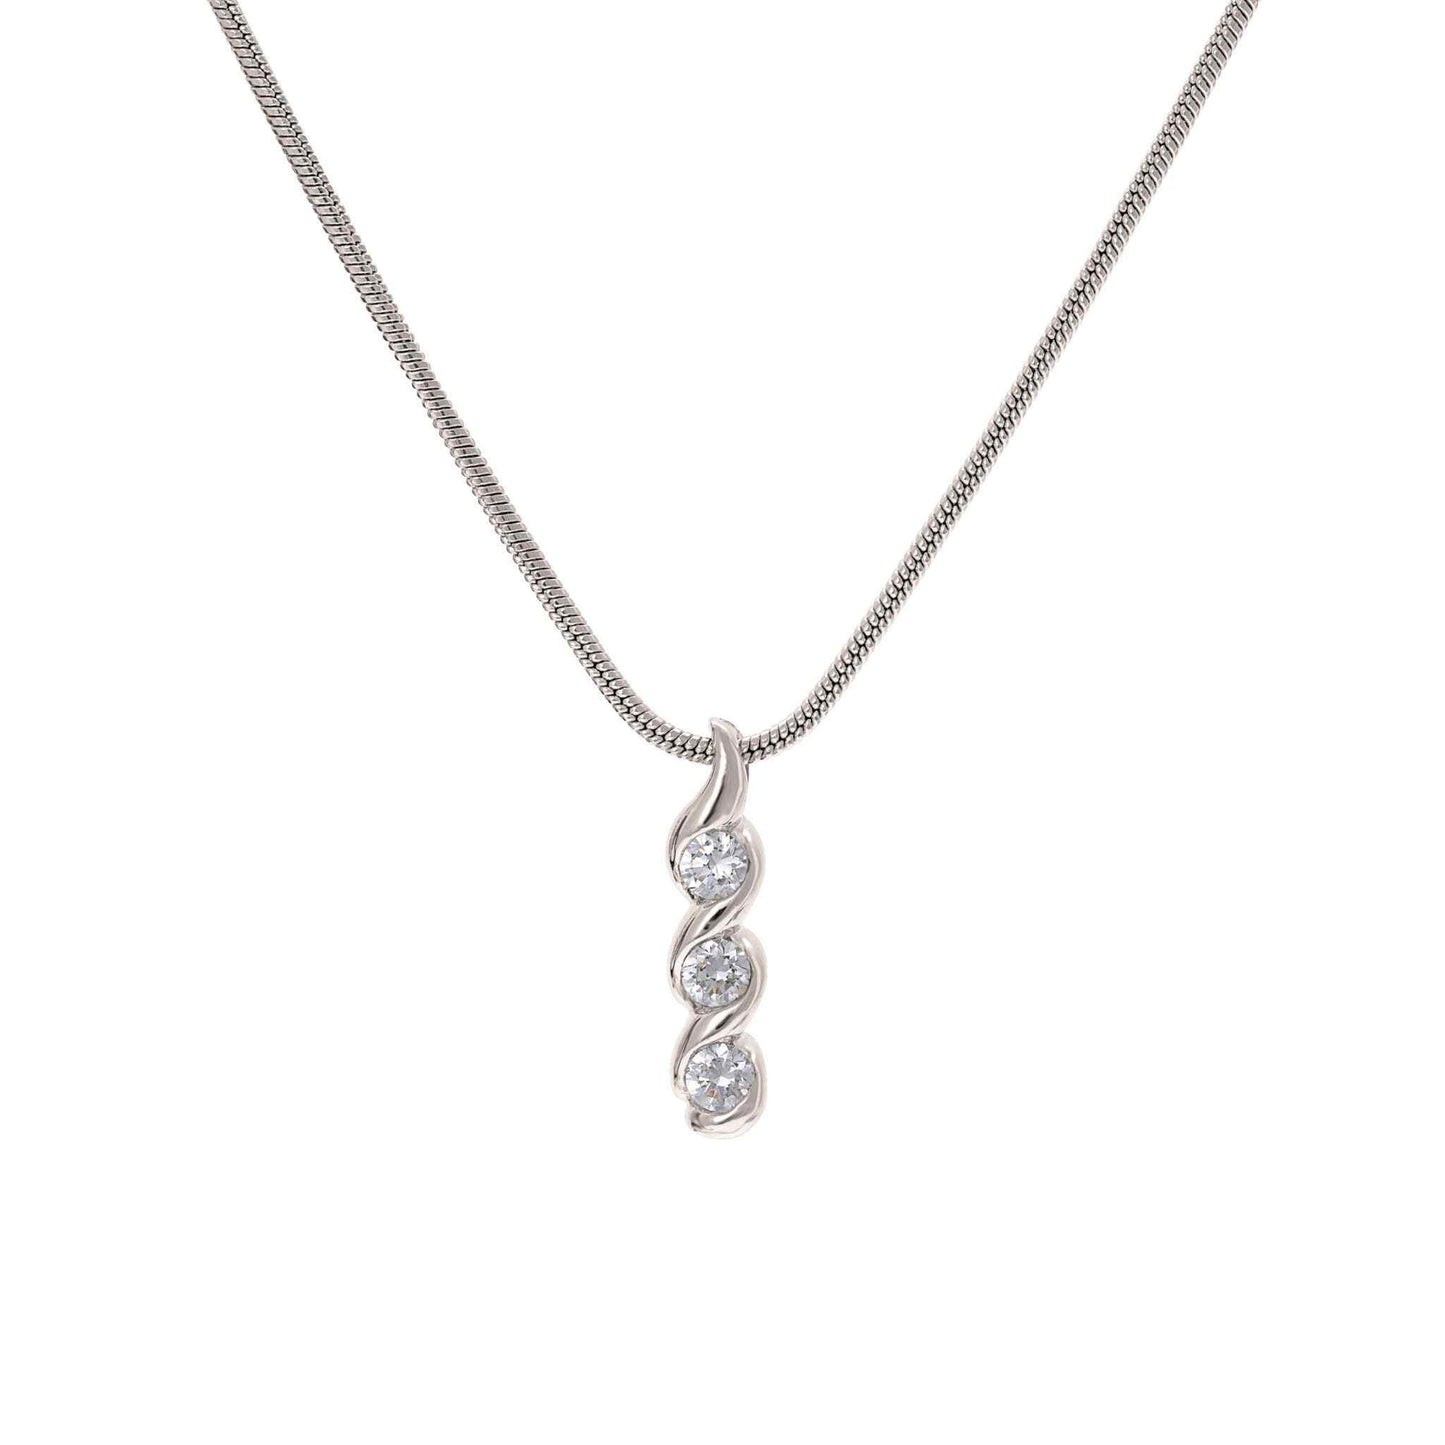 A three stone swirl necklace displayed on a neutral white background.